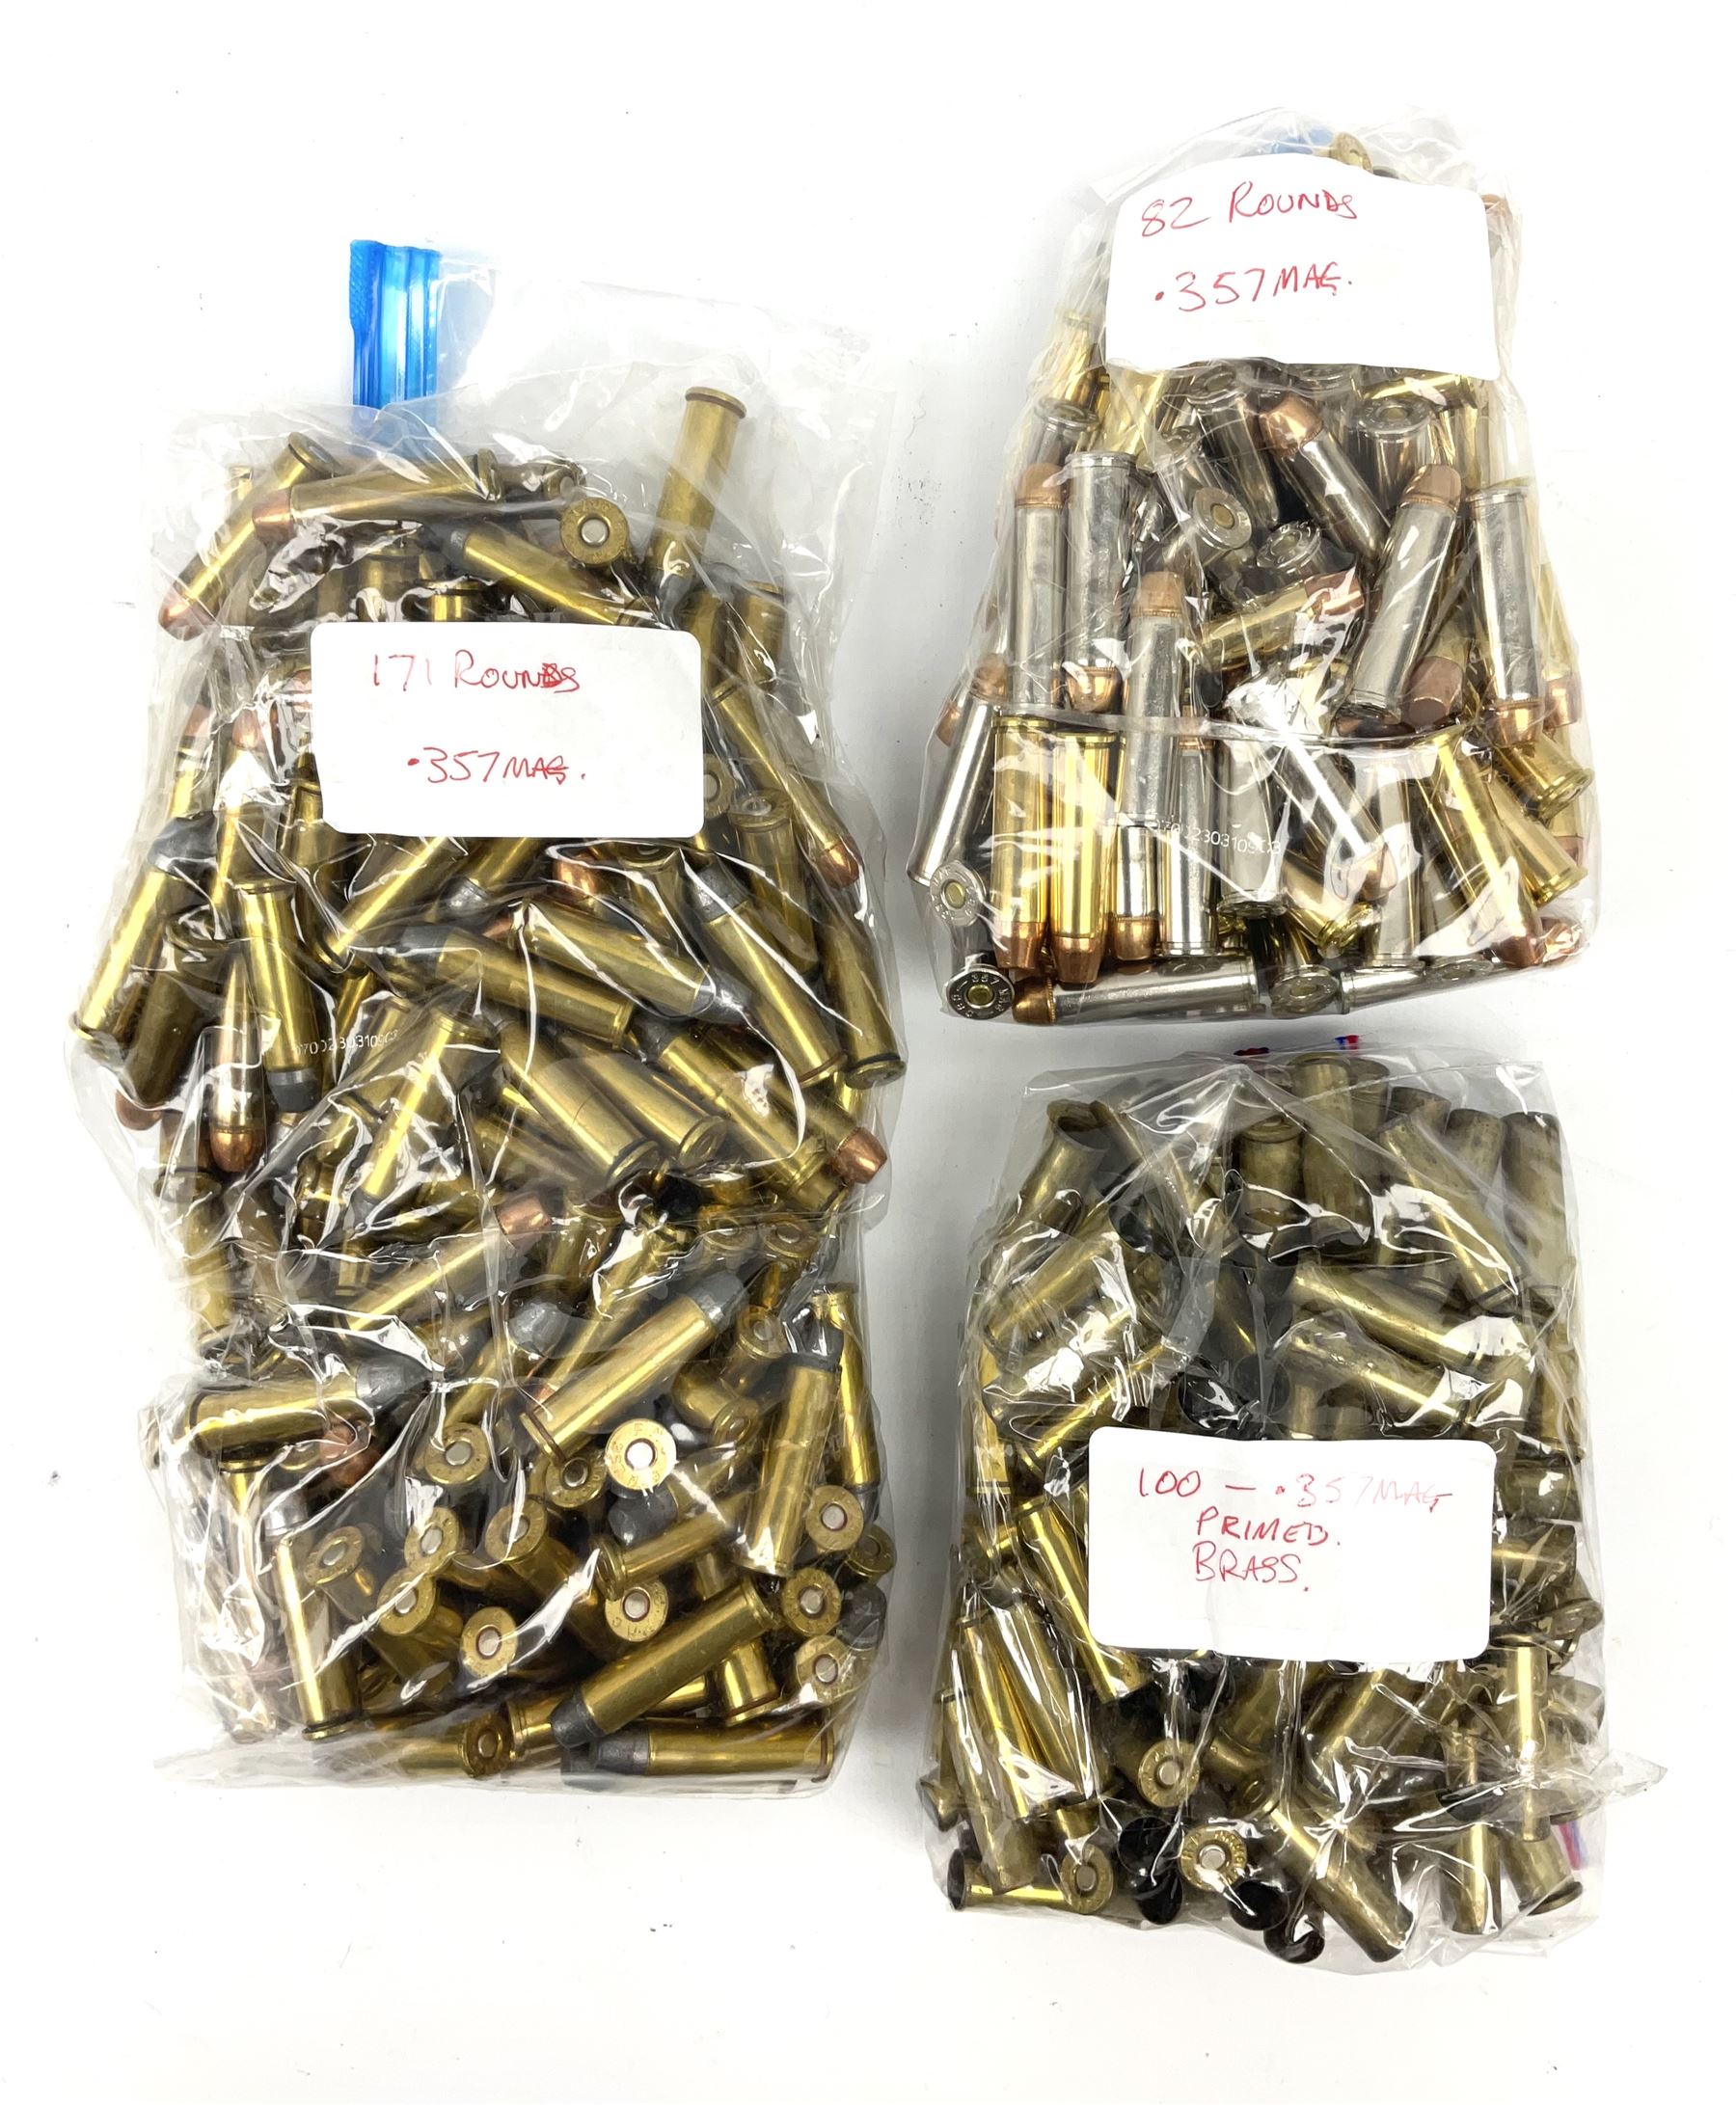 Approximately eighty five assorted .357 cartridges